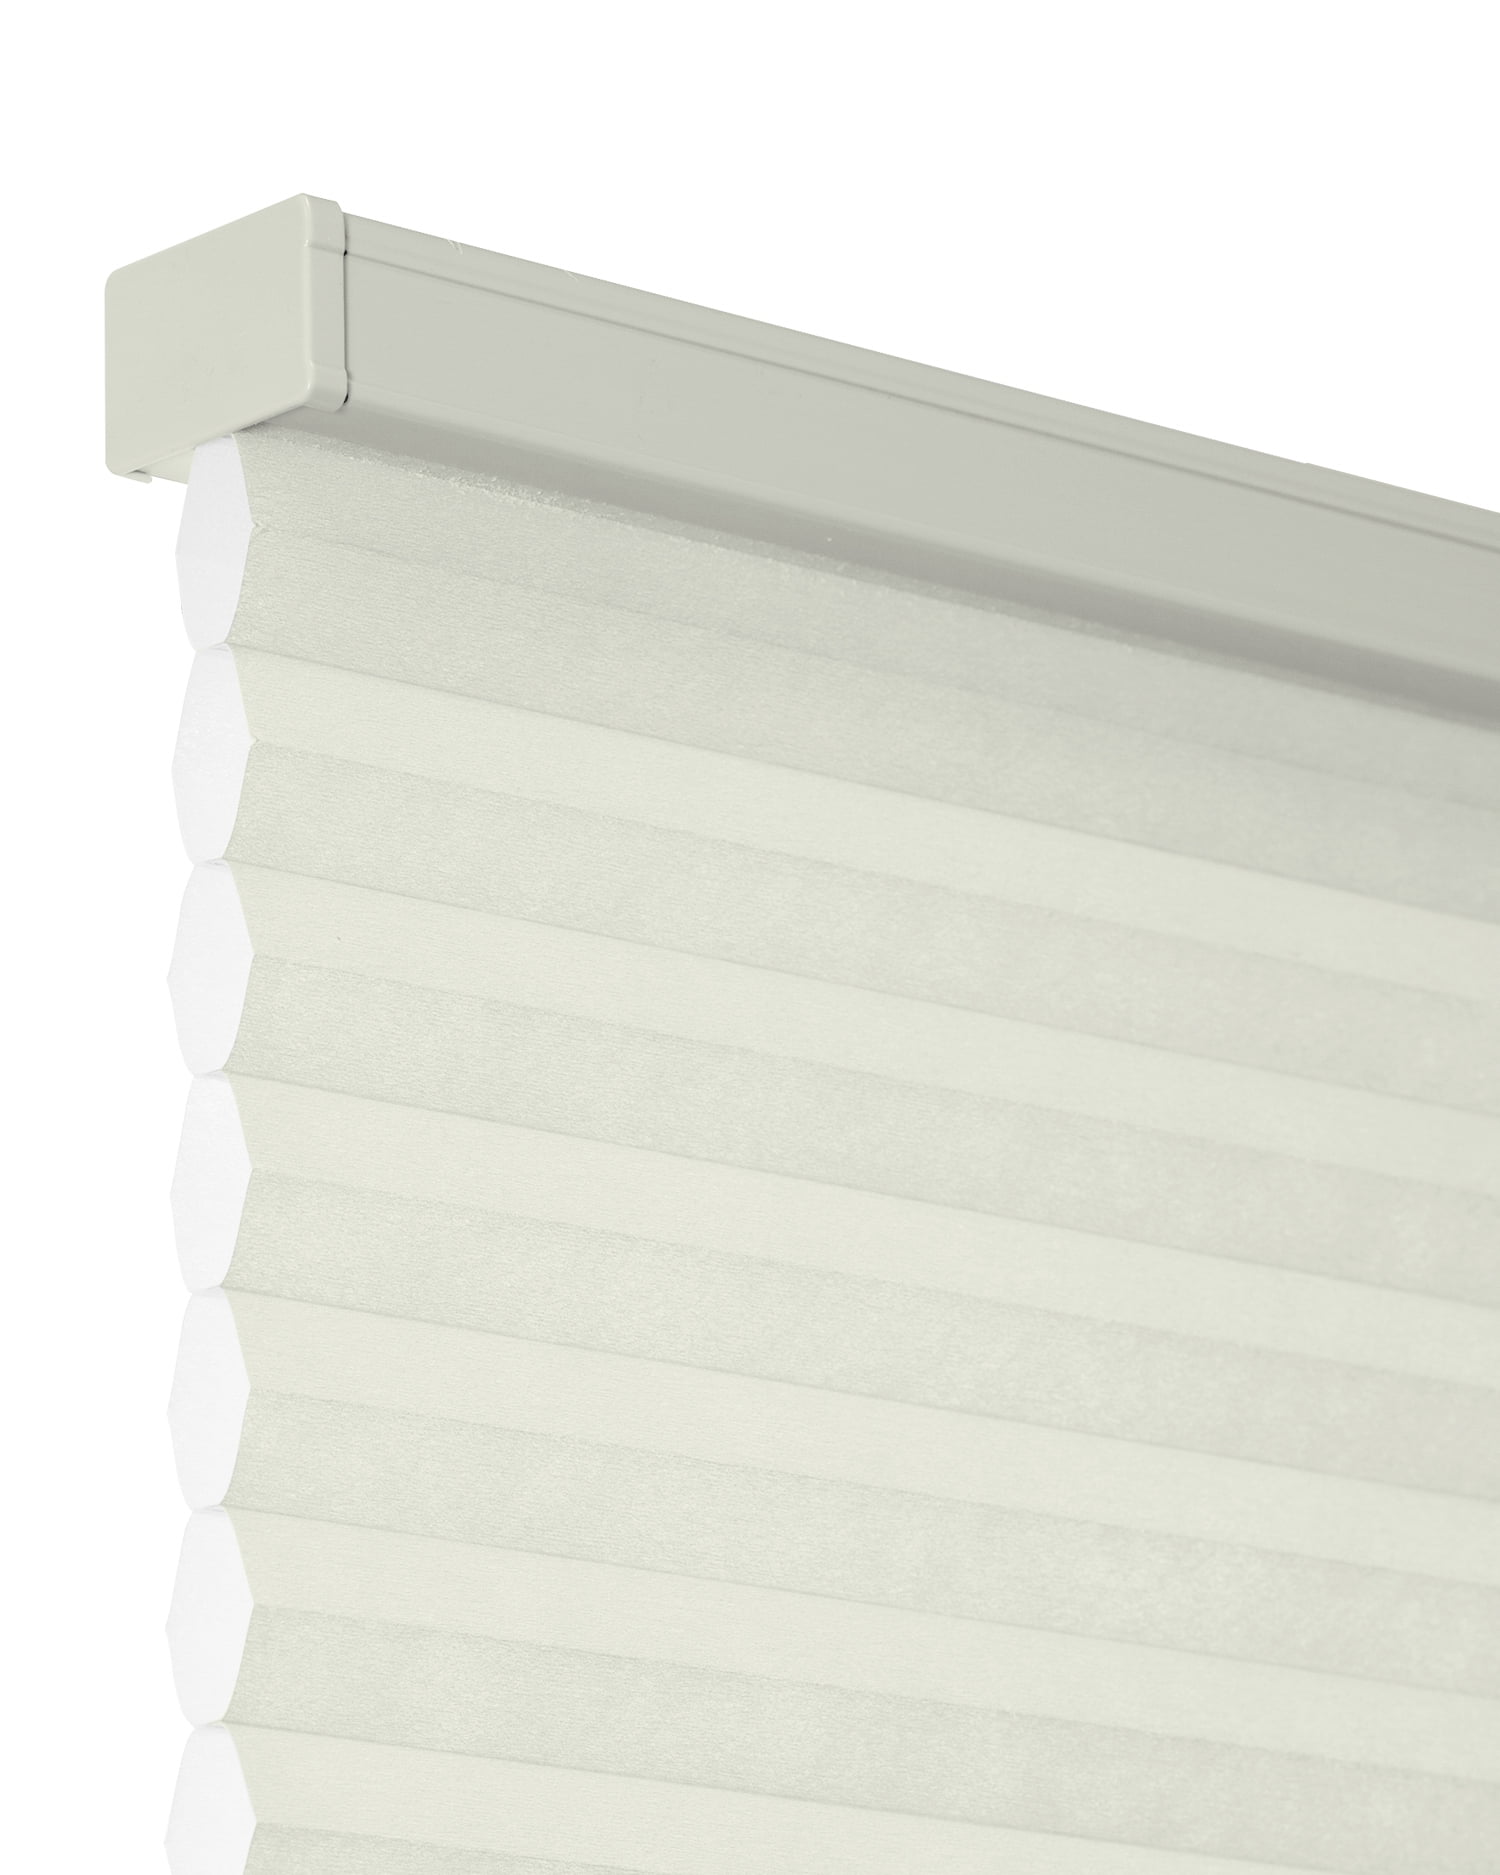  CHICOLOGY Custom Blinds for Windows, Mini Blinds, Window  Blinds, Door Blinds, Blinds & Shades, Camper Blinds, Mini Blinds for  Windows, Horizontal Window Blinds, Gray, 56.75 W X 84 H : Home